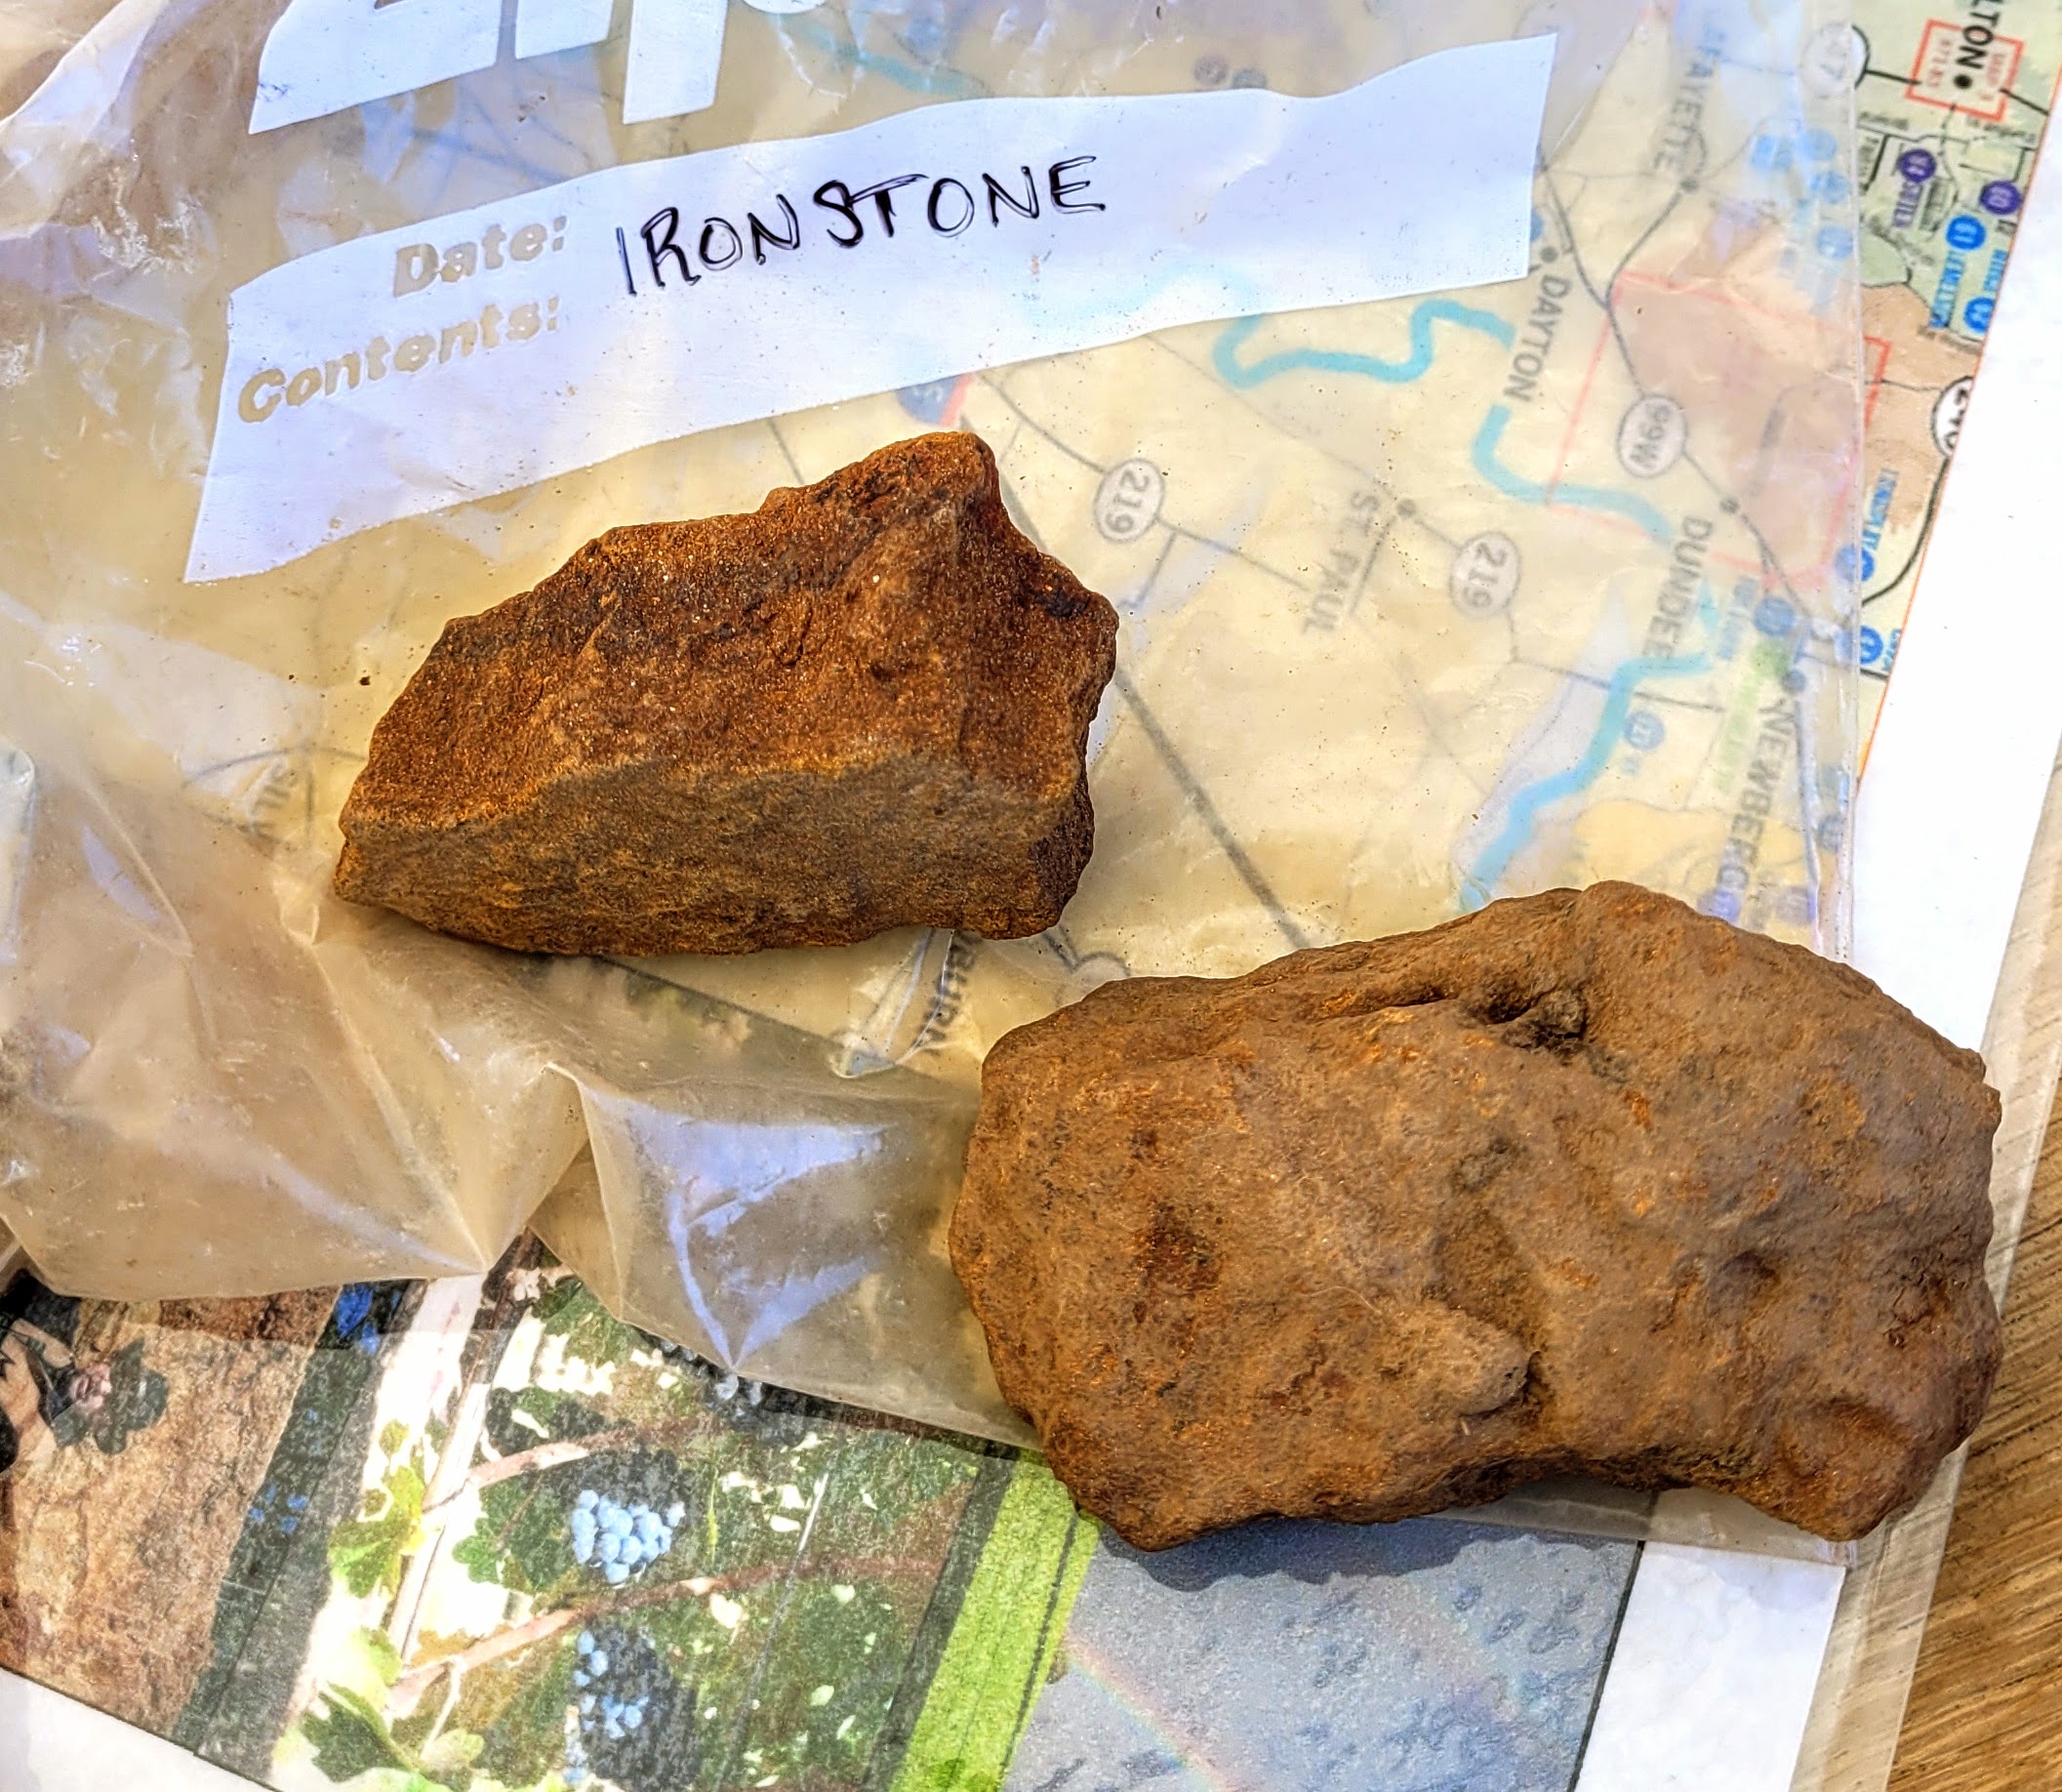 Two pieces of ironstone sit on a plastic bag.